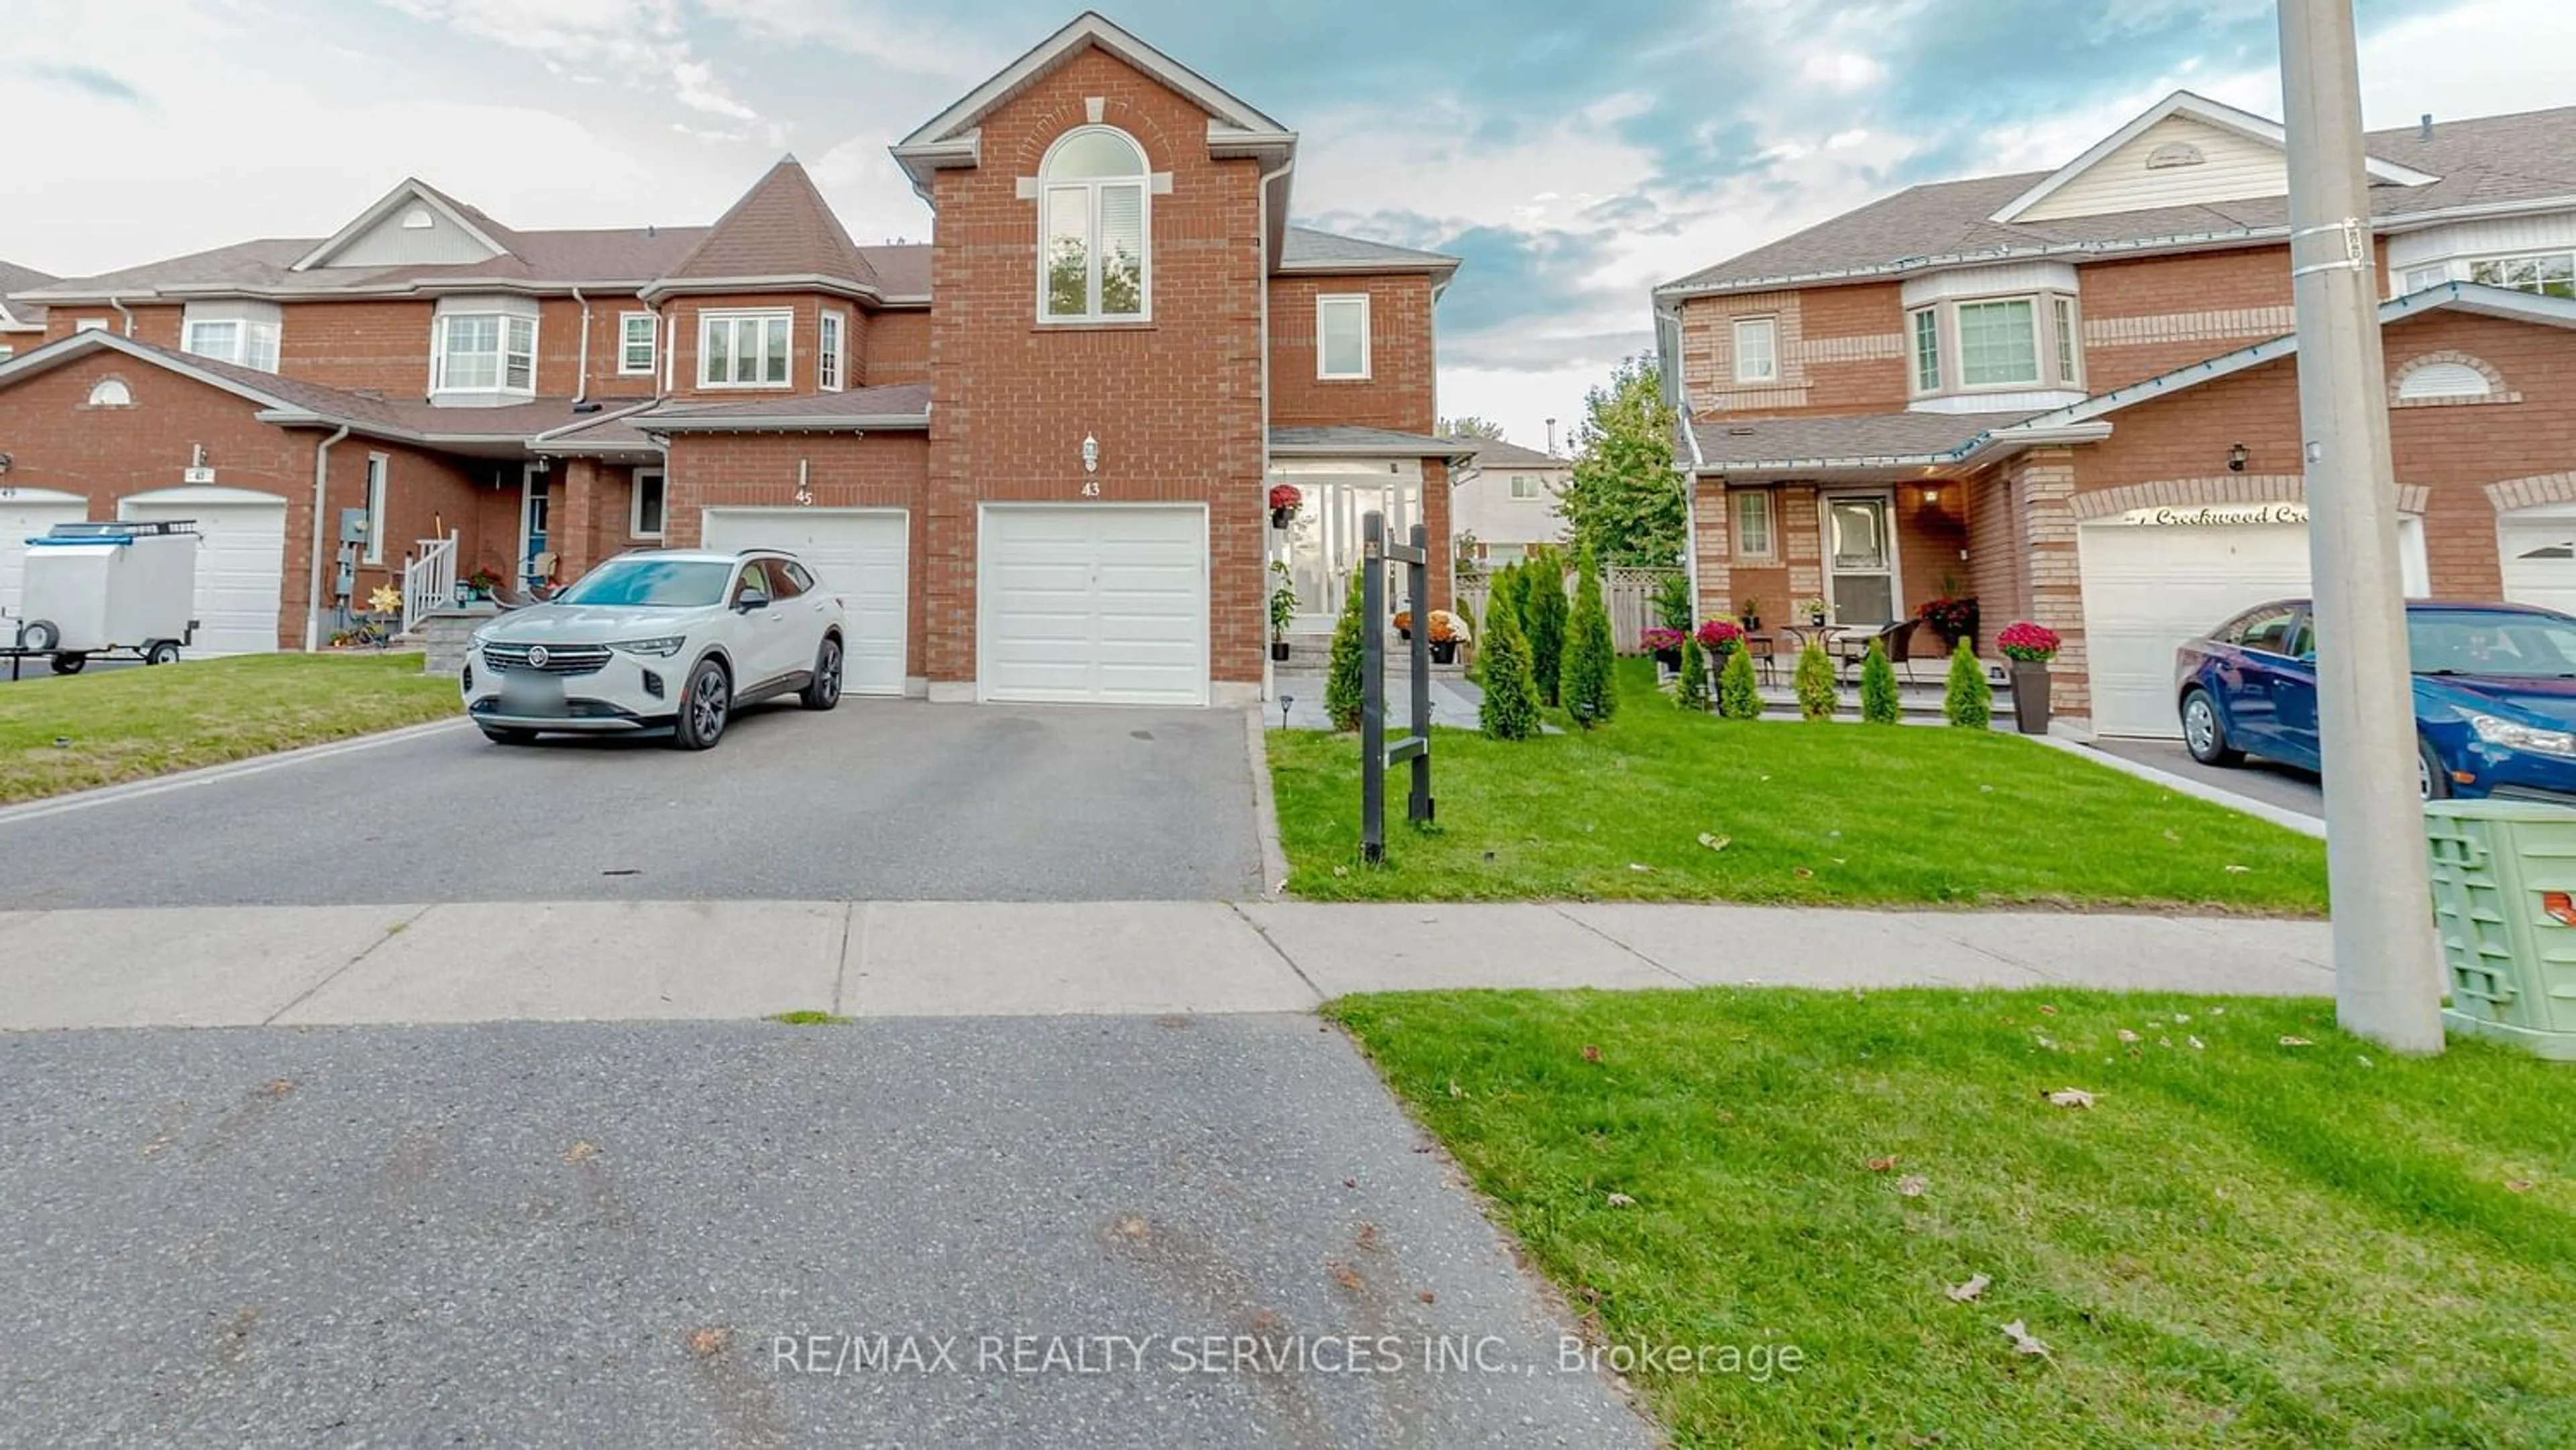 Frontside or backside of a home for 43 Creekwood Cres, Whitby Ontario L1R 2K2